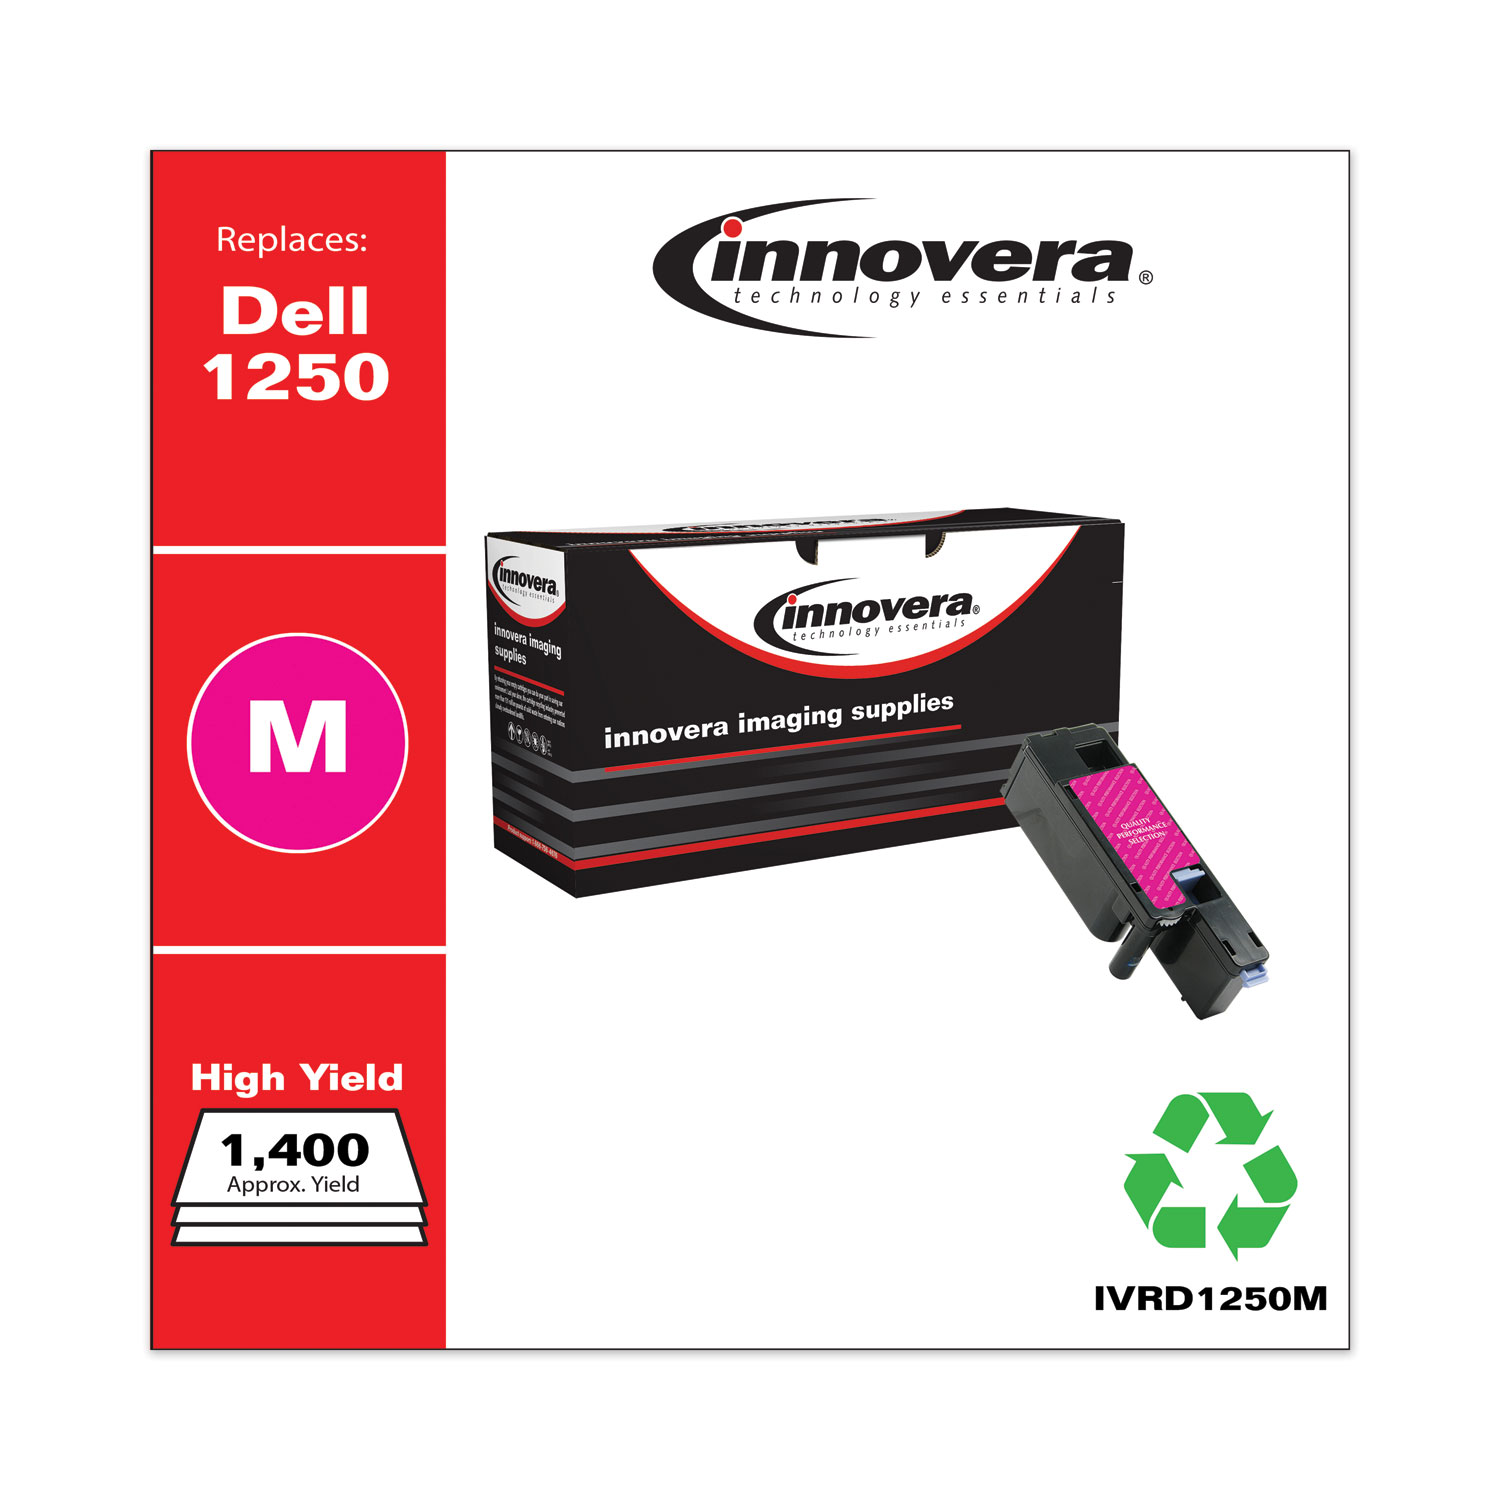 Remanufactured Magenta High-Yield Toner Cartridge, Replacement for Dell 1250 (331-0780), 1,400 Page-Yield